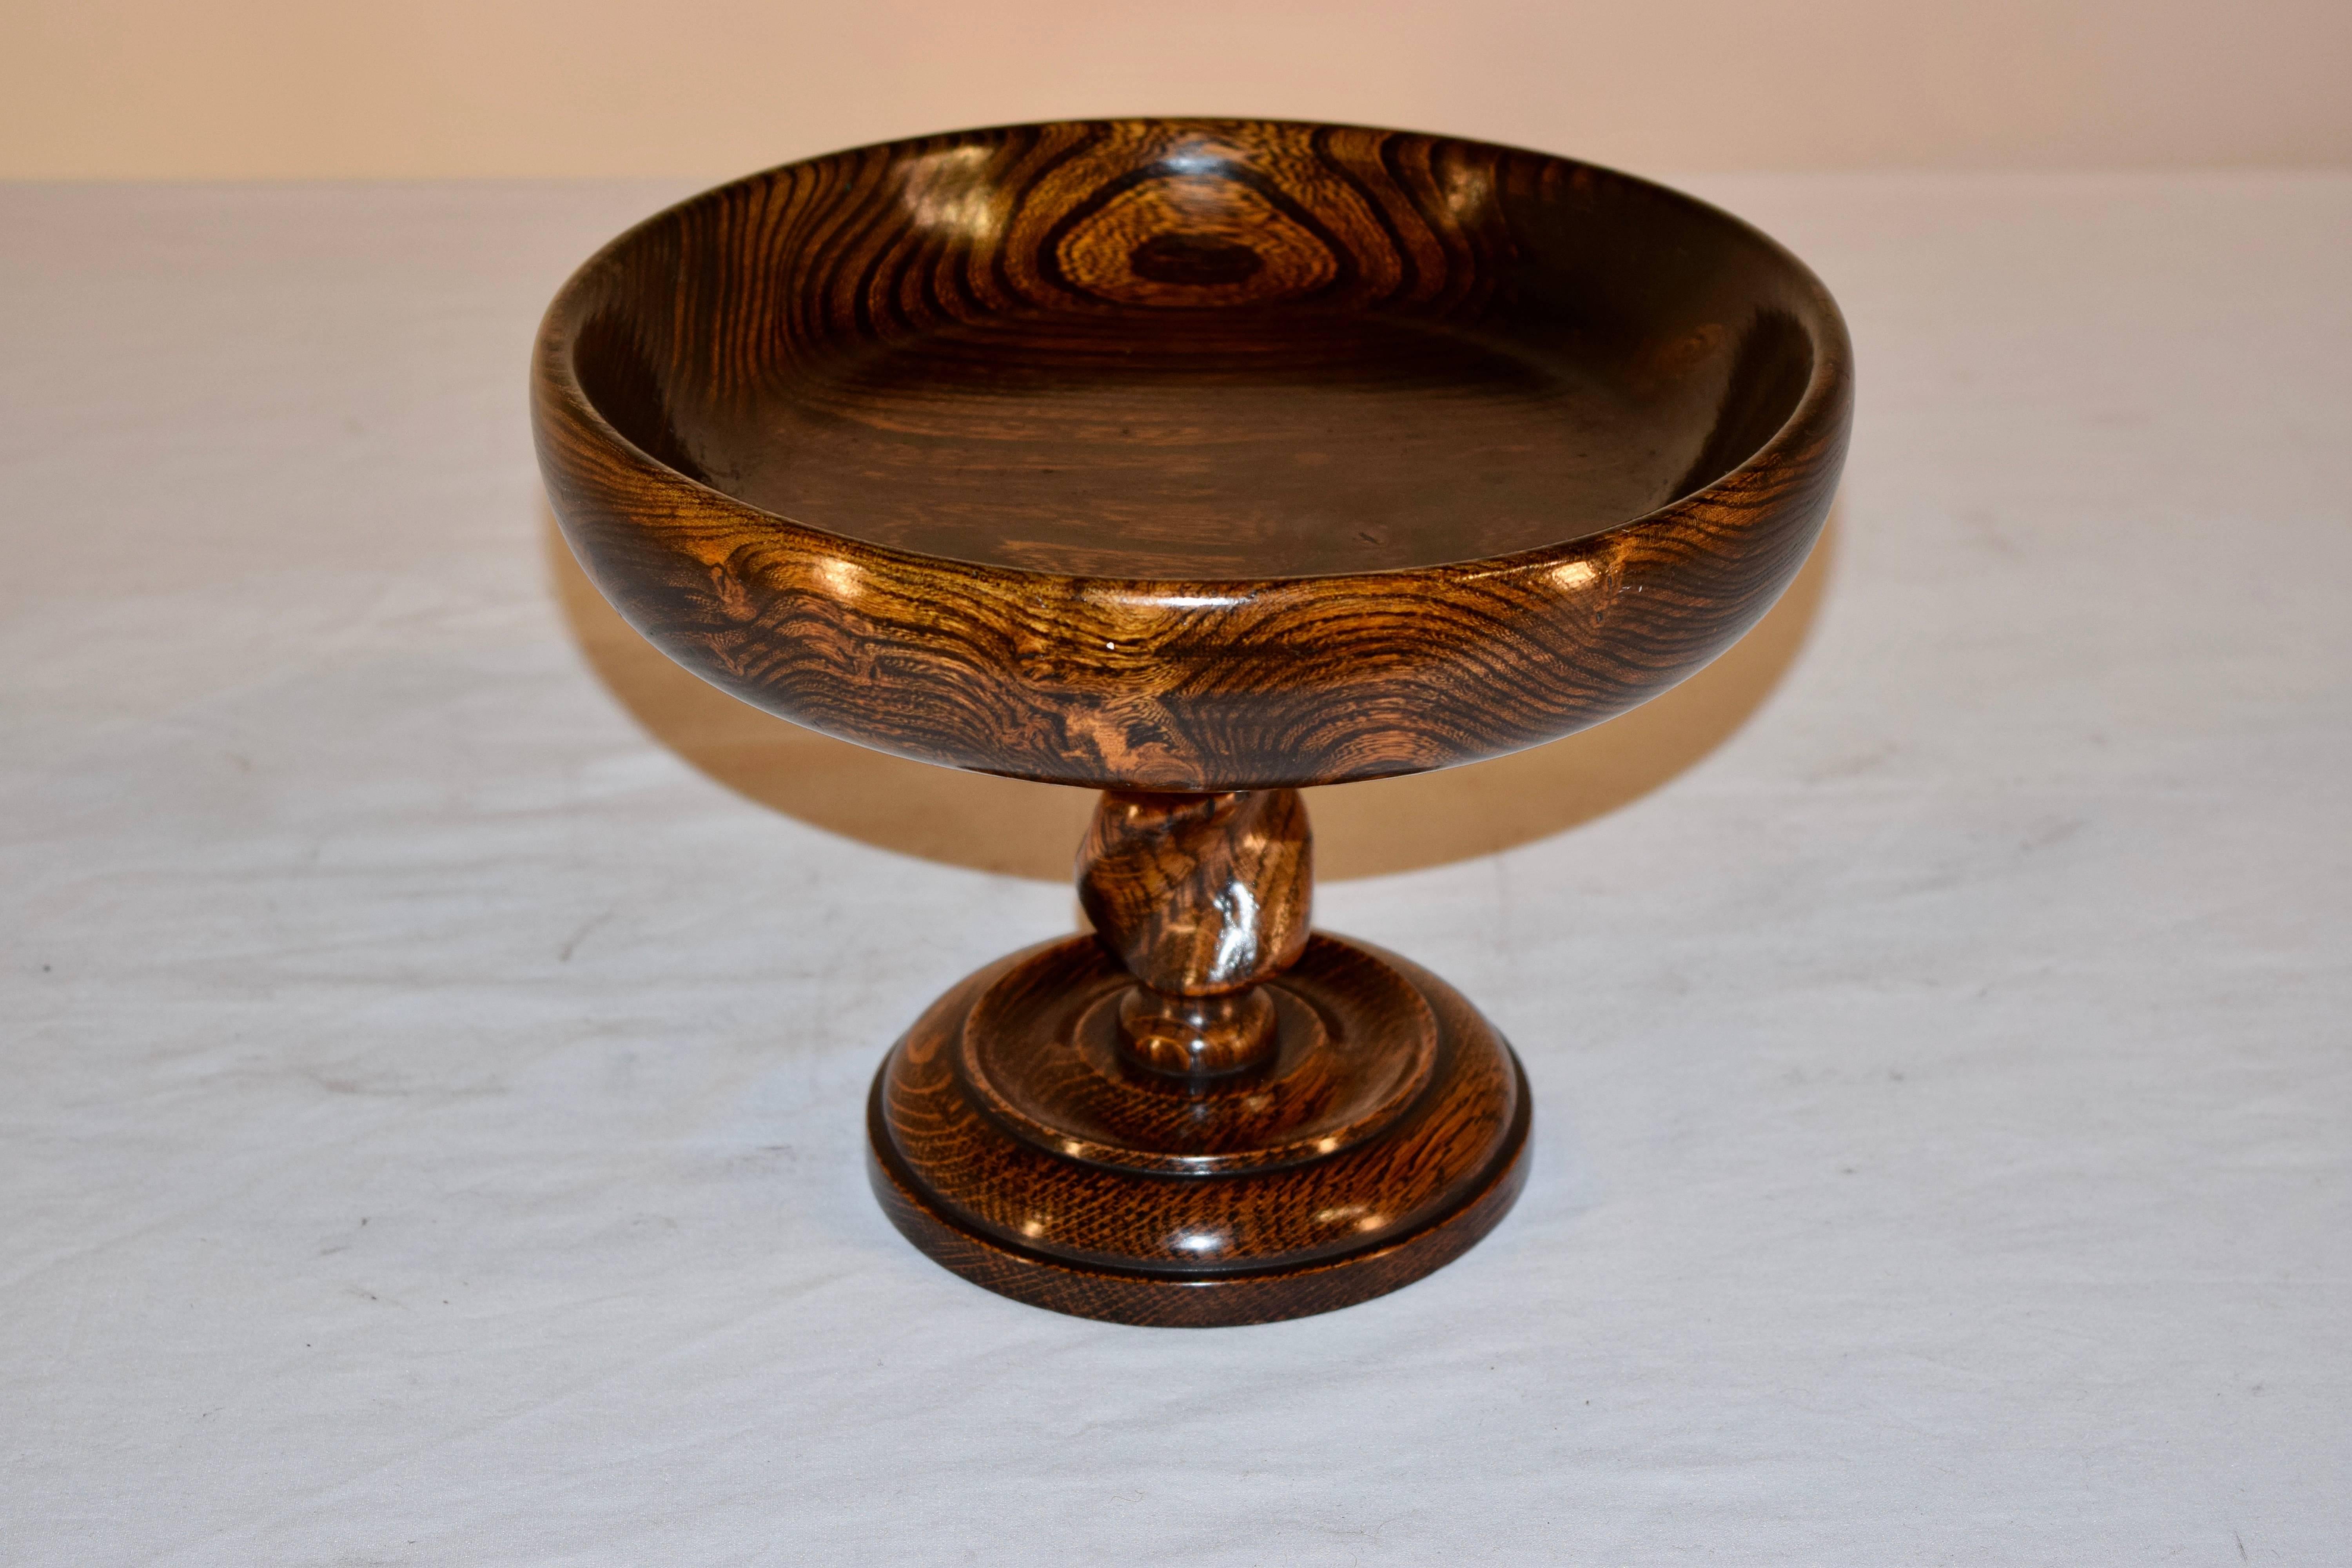 Late 19th century hand-turned oak footed compote from England.